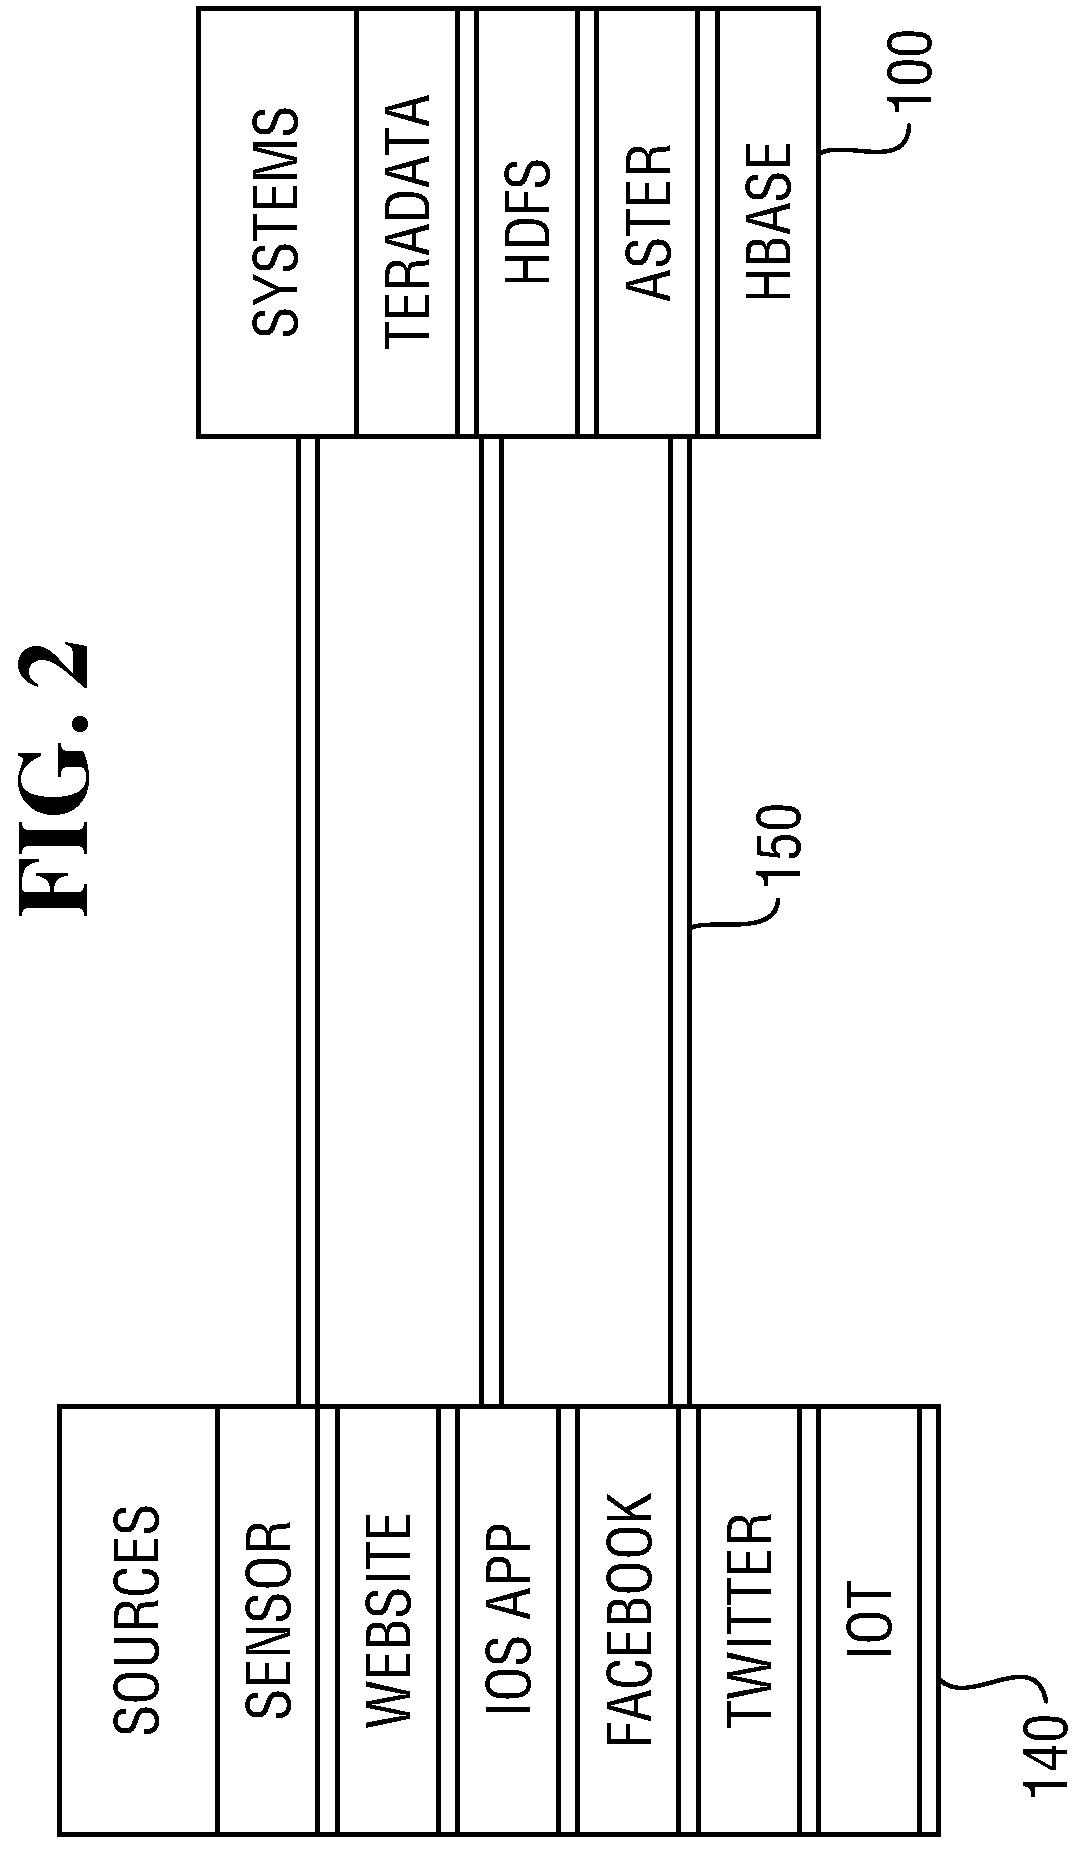 Multi-level reservoir sampling over distributed databases and distributed streams